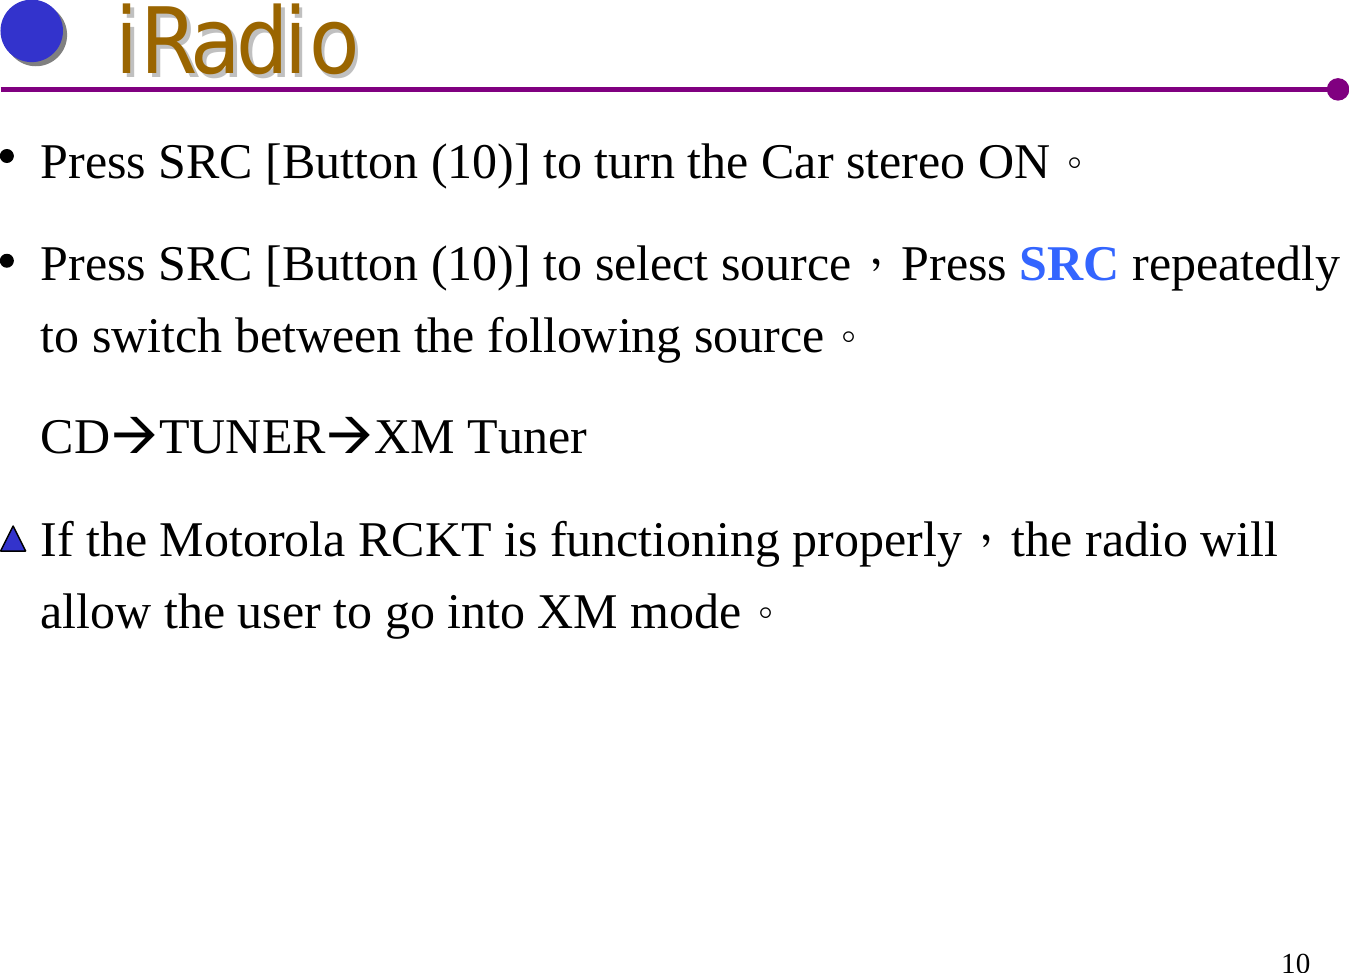 10iRadioiRadioPress SRC [Button (10)] to turn the Car stereo ON。Press SRC [Button (10)] to select source，Press SRC repeatedly to switch between the following source。CDÆTUNERÆXM TunerIf the Motorola RCKT is functioning properly，the radio will allow the user to go into XM mode。